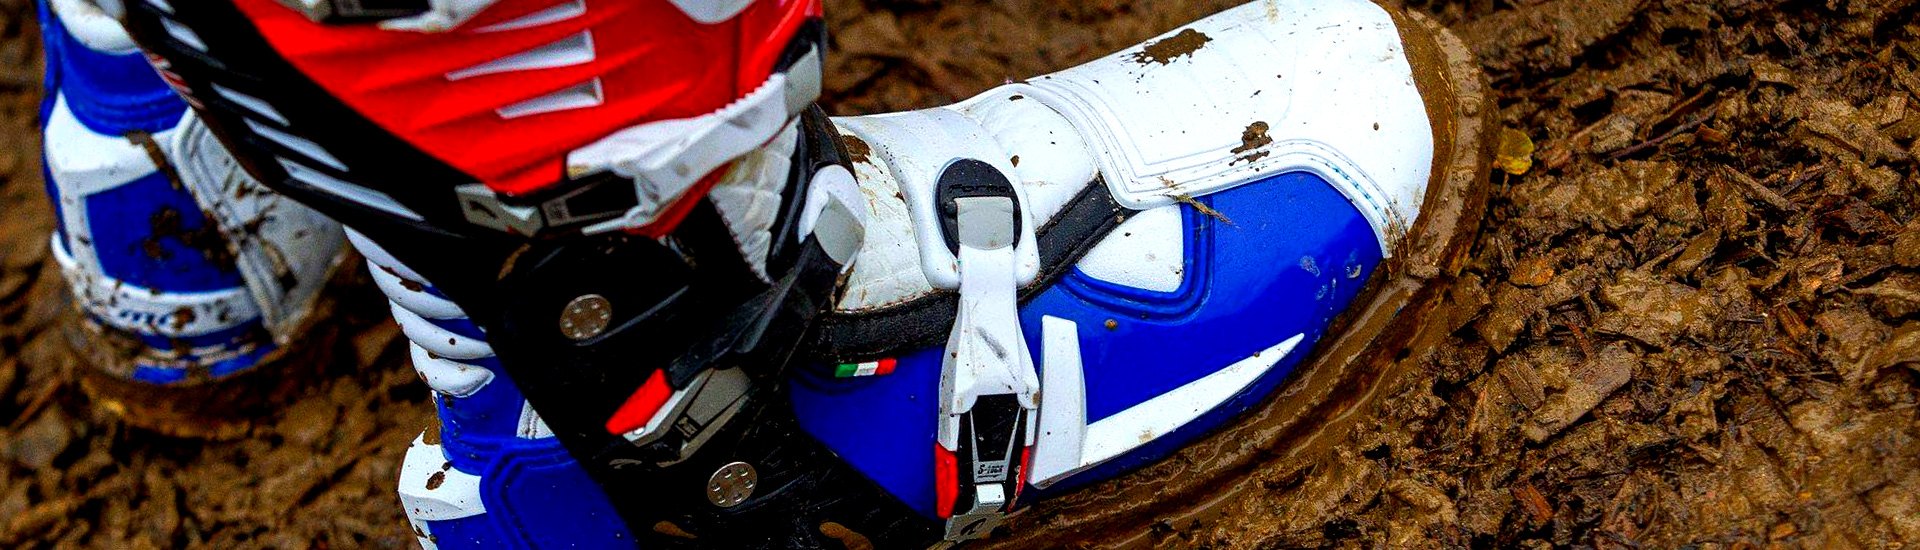 Motorcycle Boots | Making the Best Choice Based on Your Bike & Riding Style